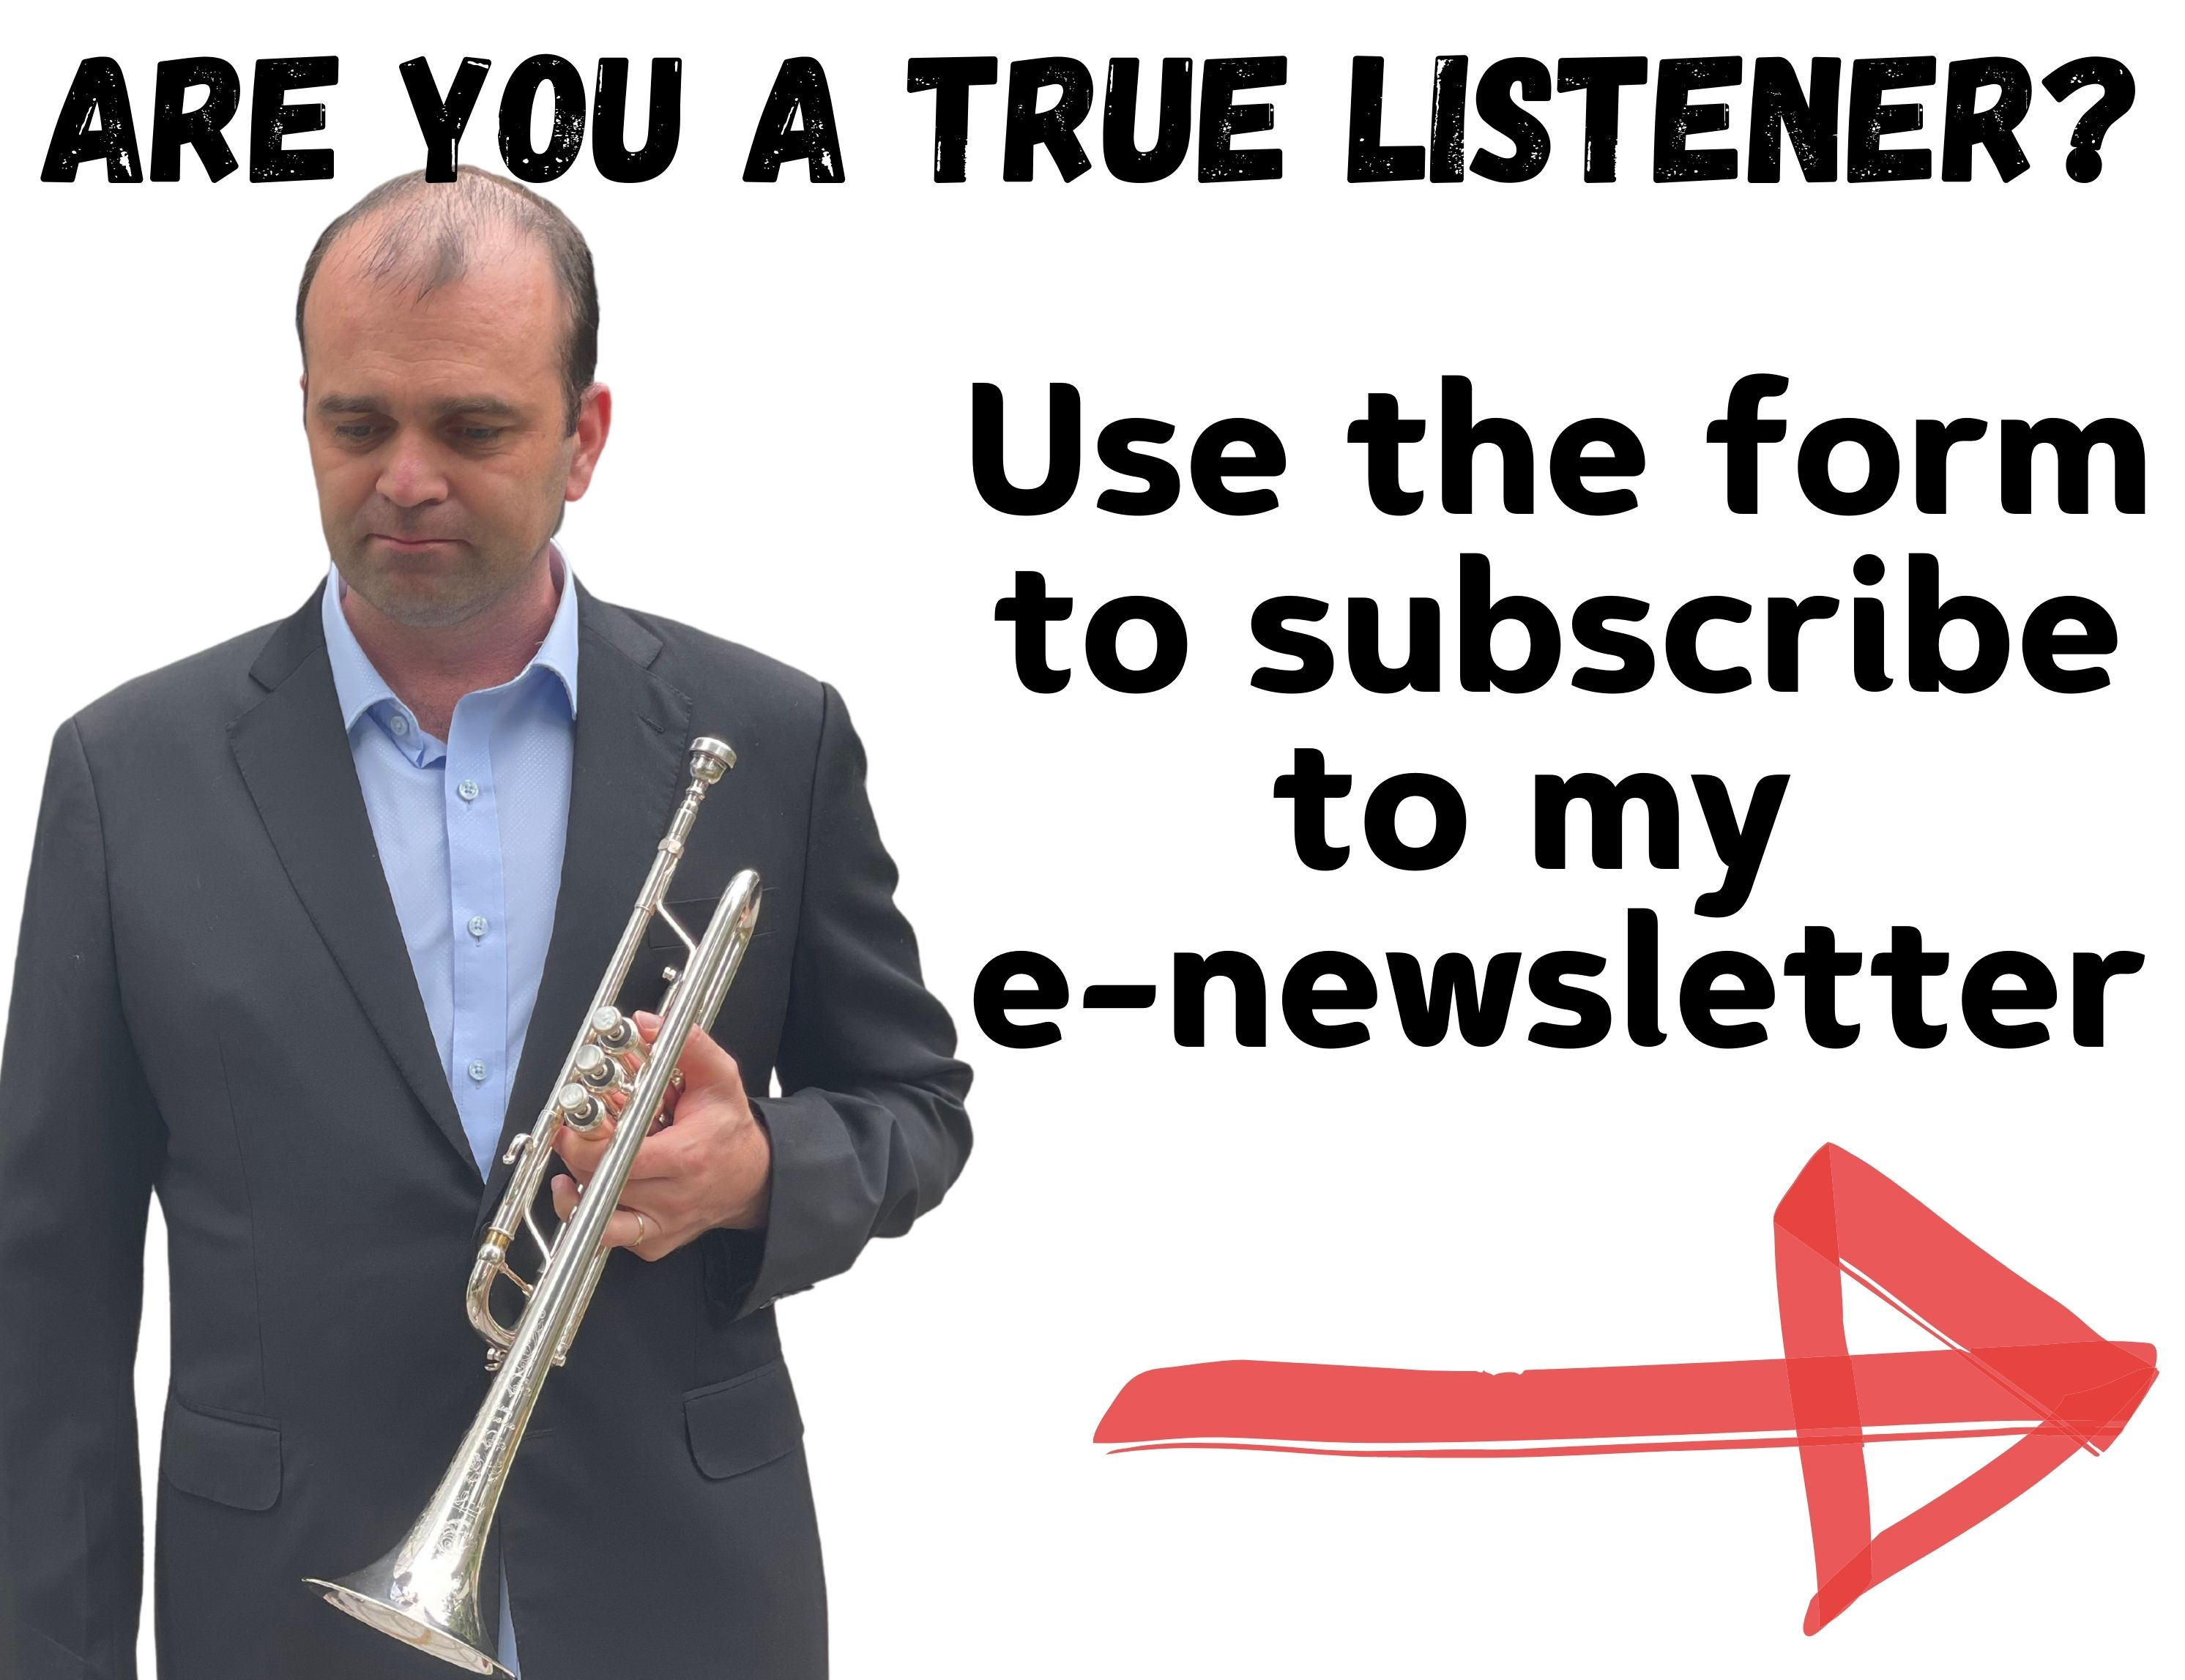 Subscribe to my daily e-newsletter by entering your email address below.